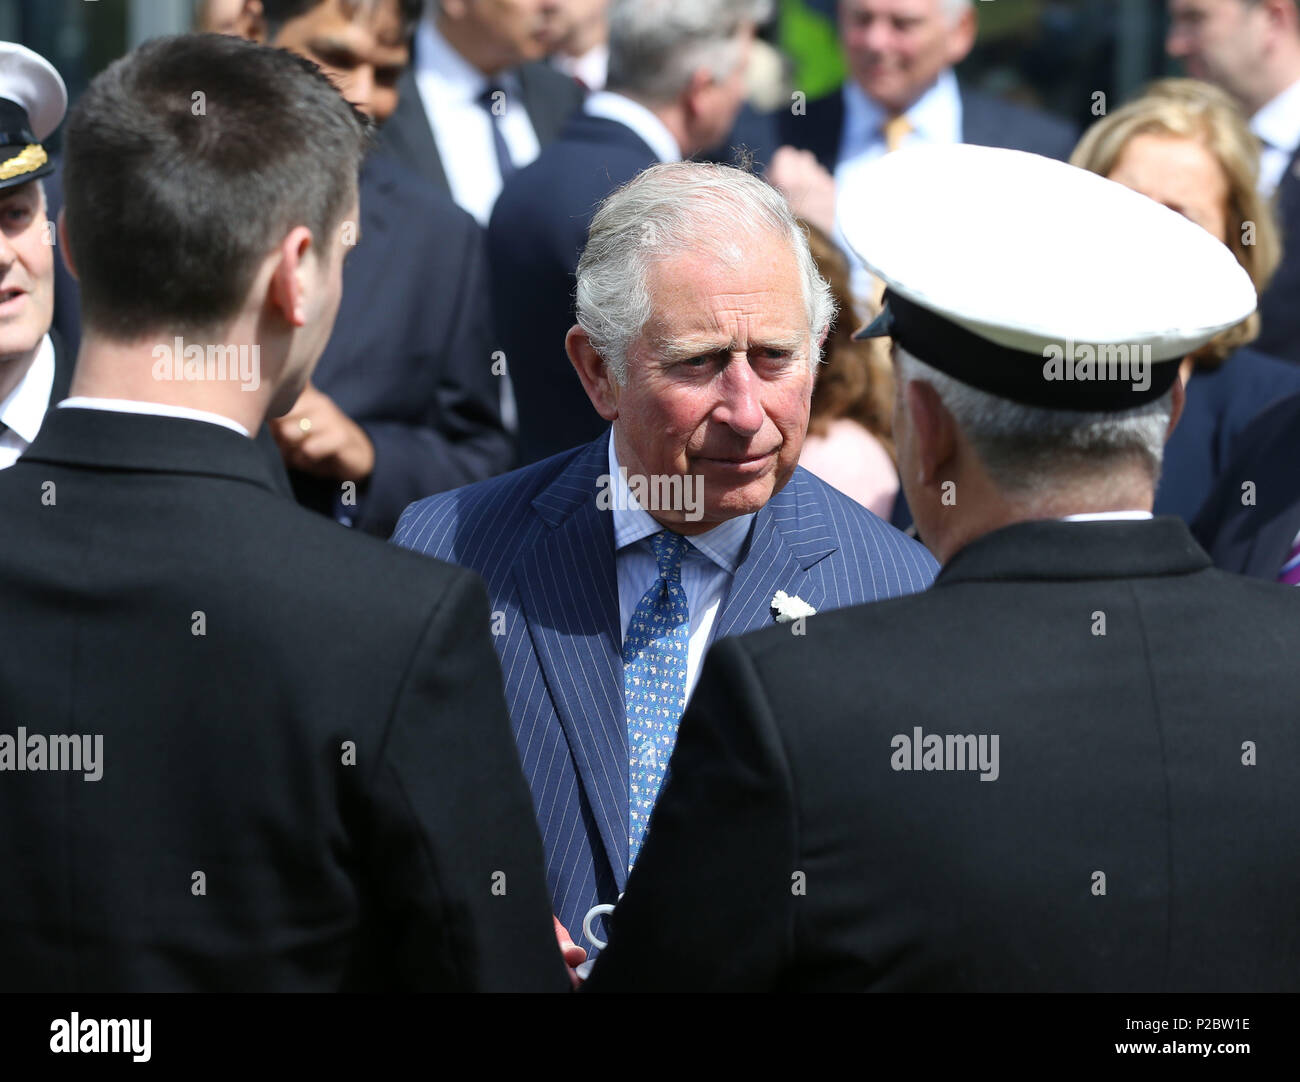 The Prince of Wales during a visit to the National Maritime College of Ireland as part of his tour of the Republic of Ireland. PRESS ASSOCIATION Photo. PRESS ASSOCIATION Photo. Picture date: Thursday June 14, 2018. See PA story ROYAL Charles. Photo credit should read: Brian Lawless/PA Wire Stock Photo